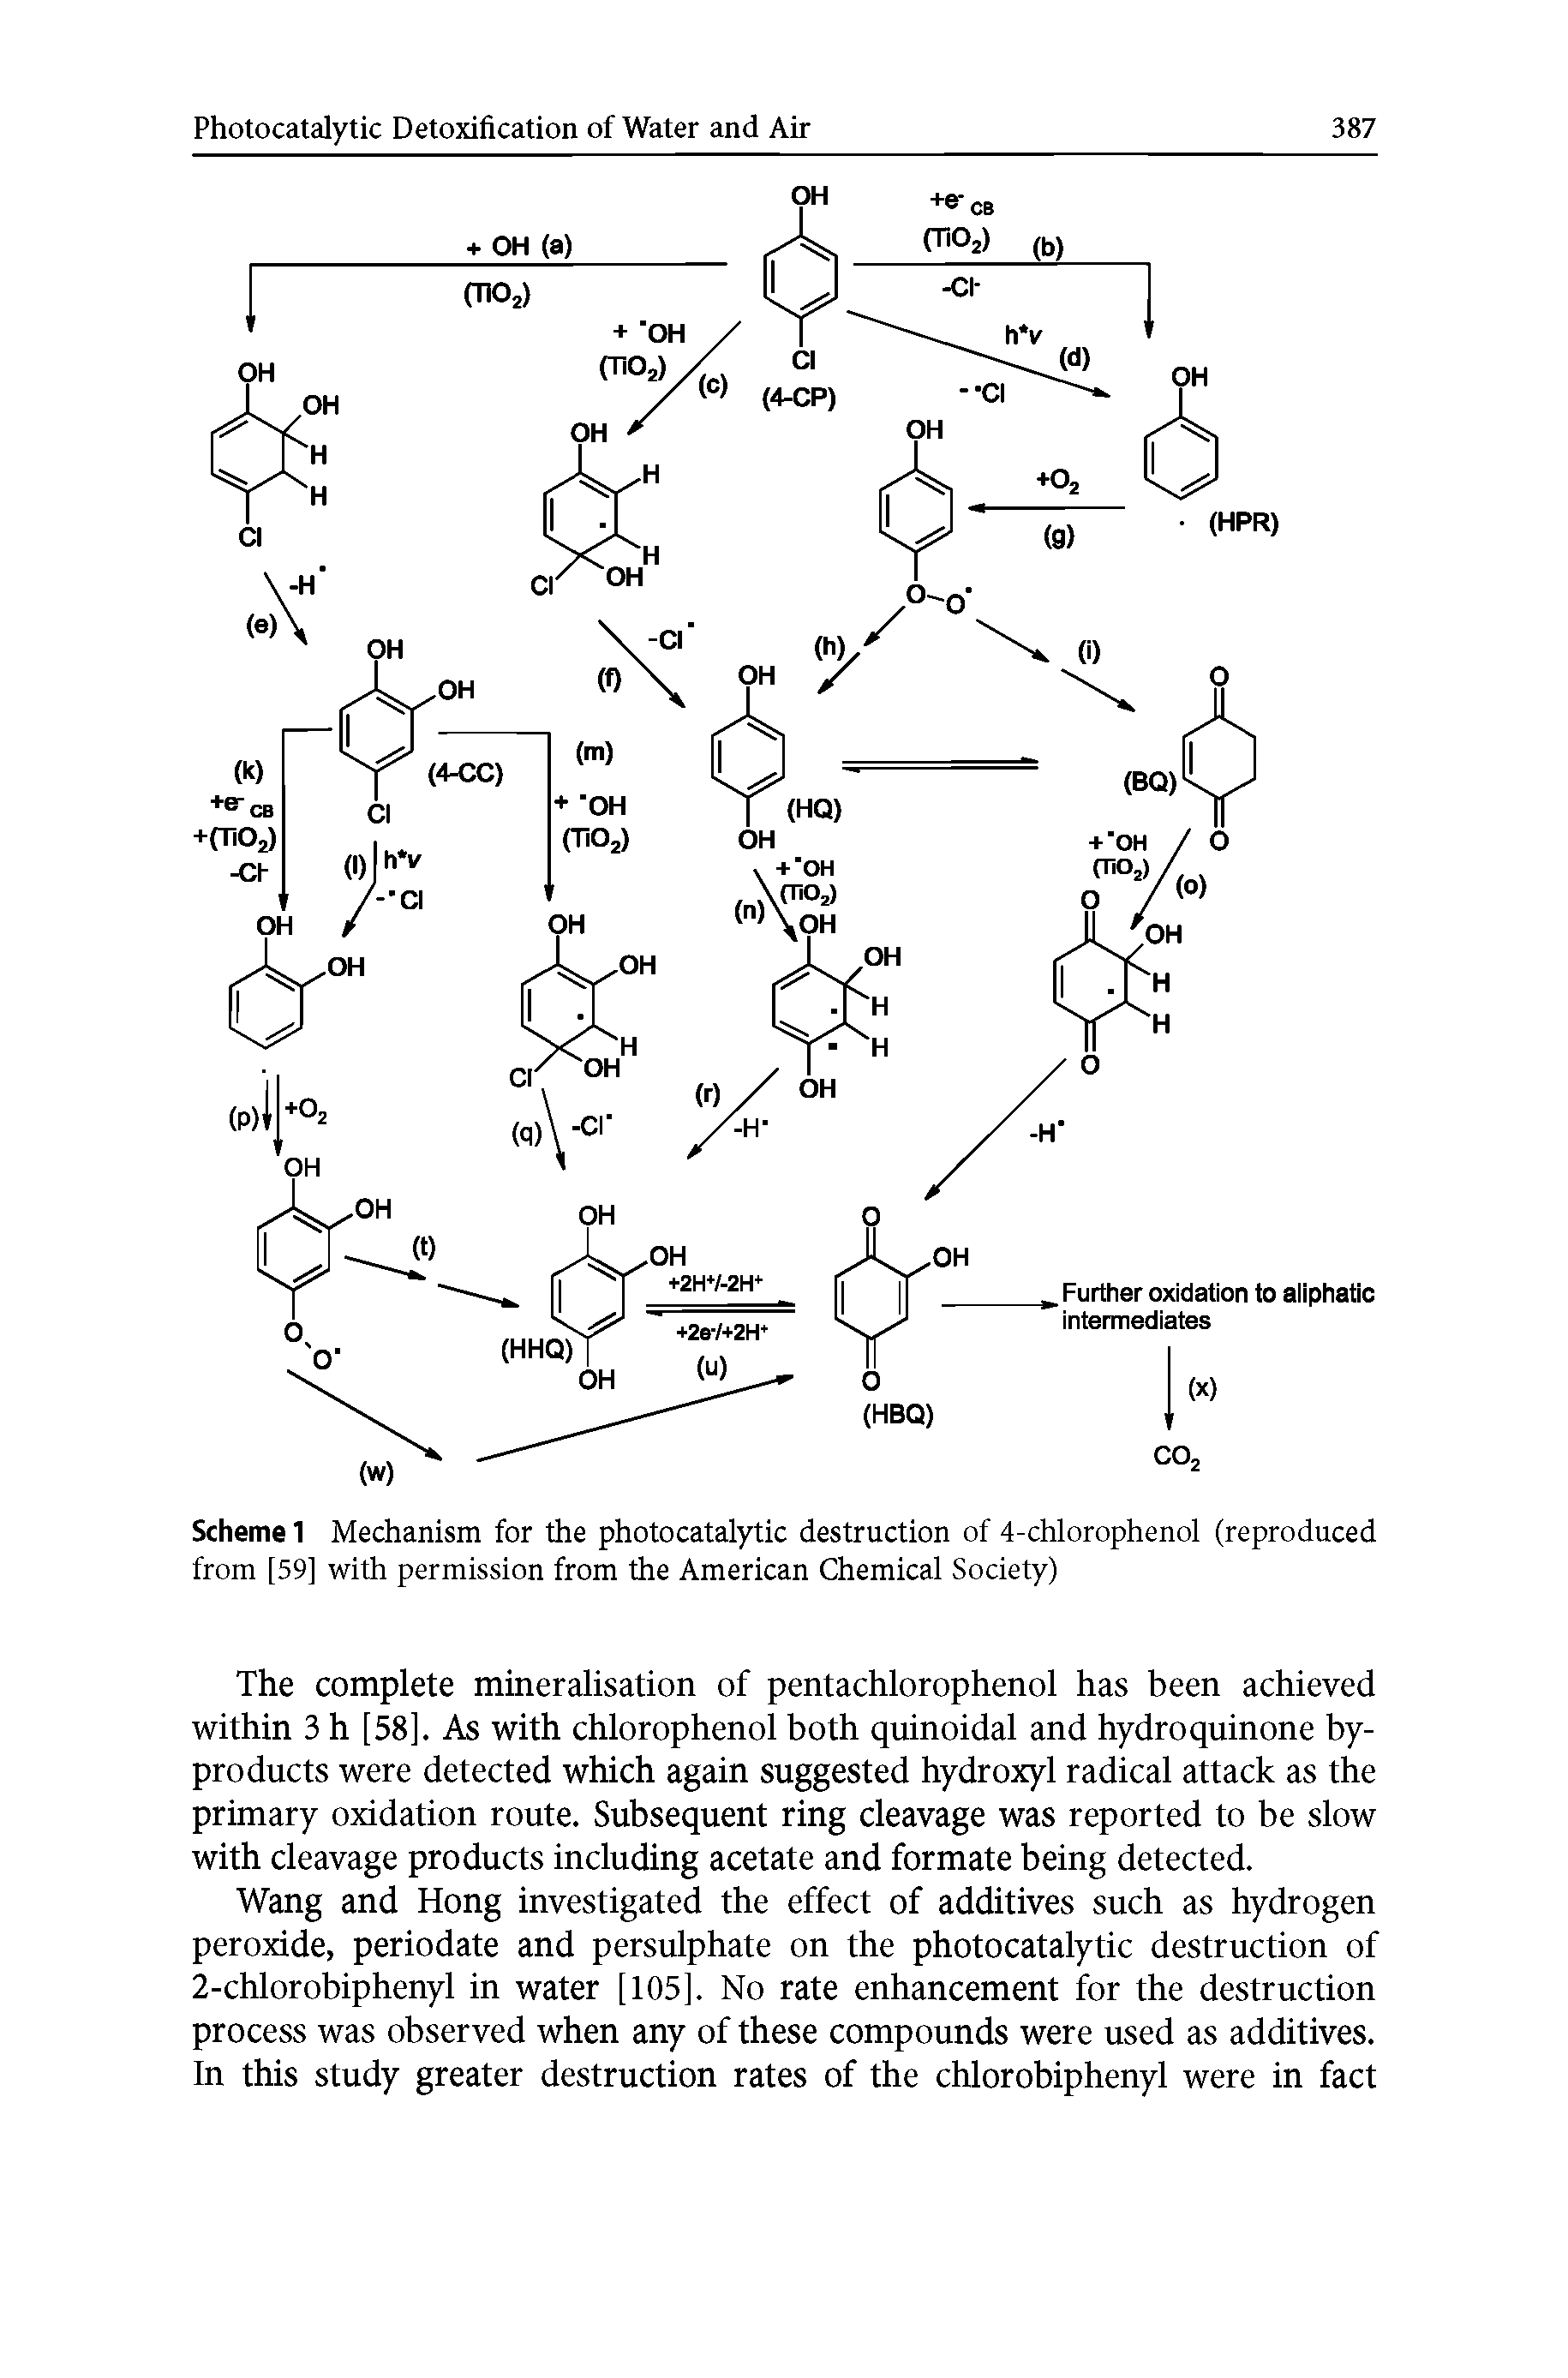 Scheme 1 Mechanism for the photocatalytic destruction of 4-chlorophenol (reproduced from [59] with permission from the American Chemical Society)...